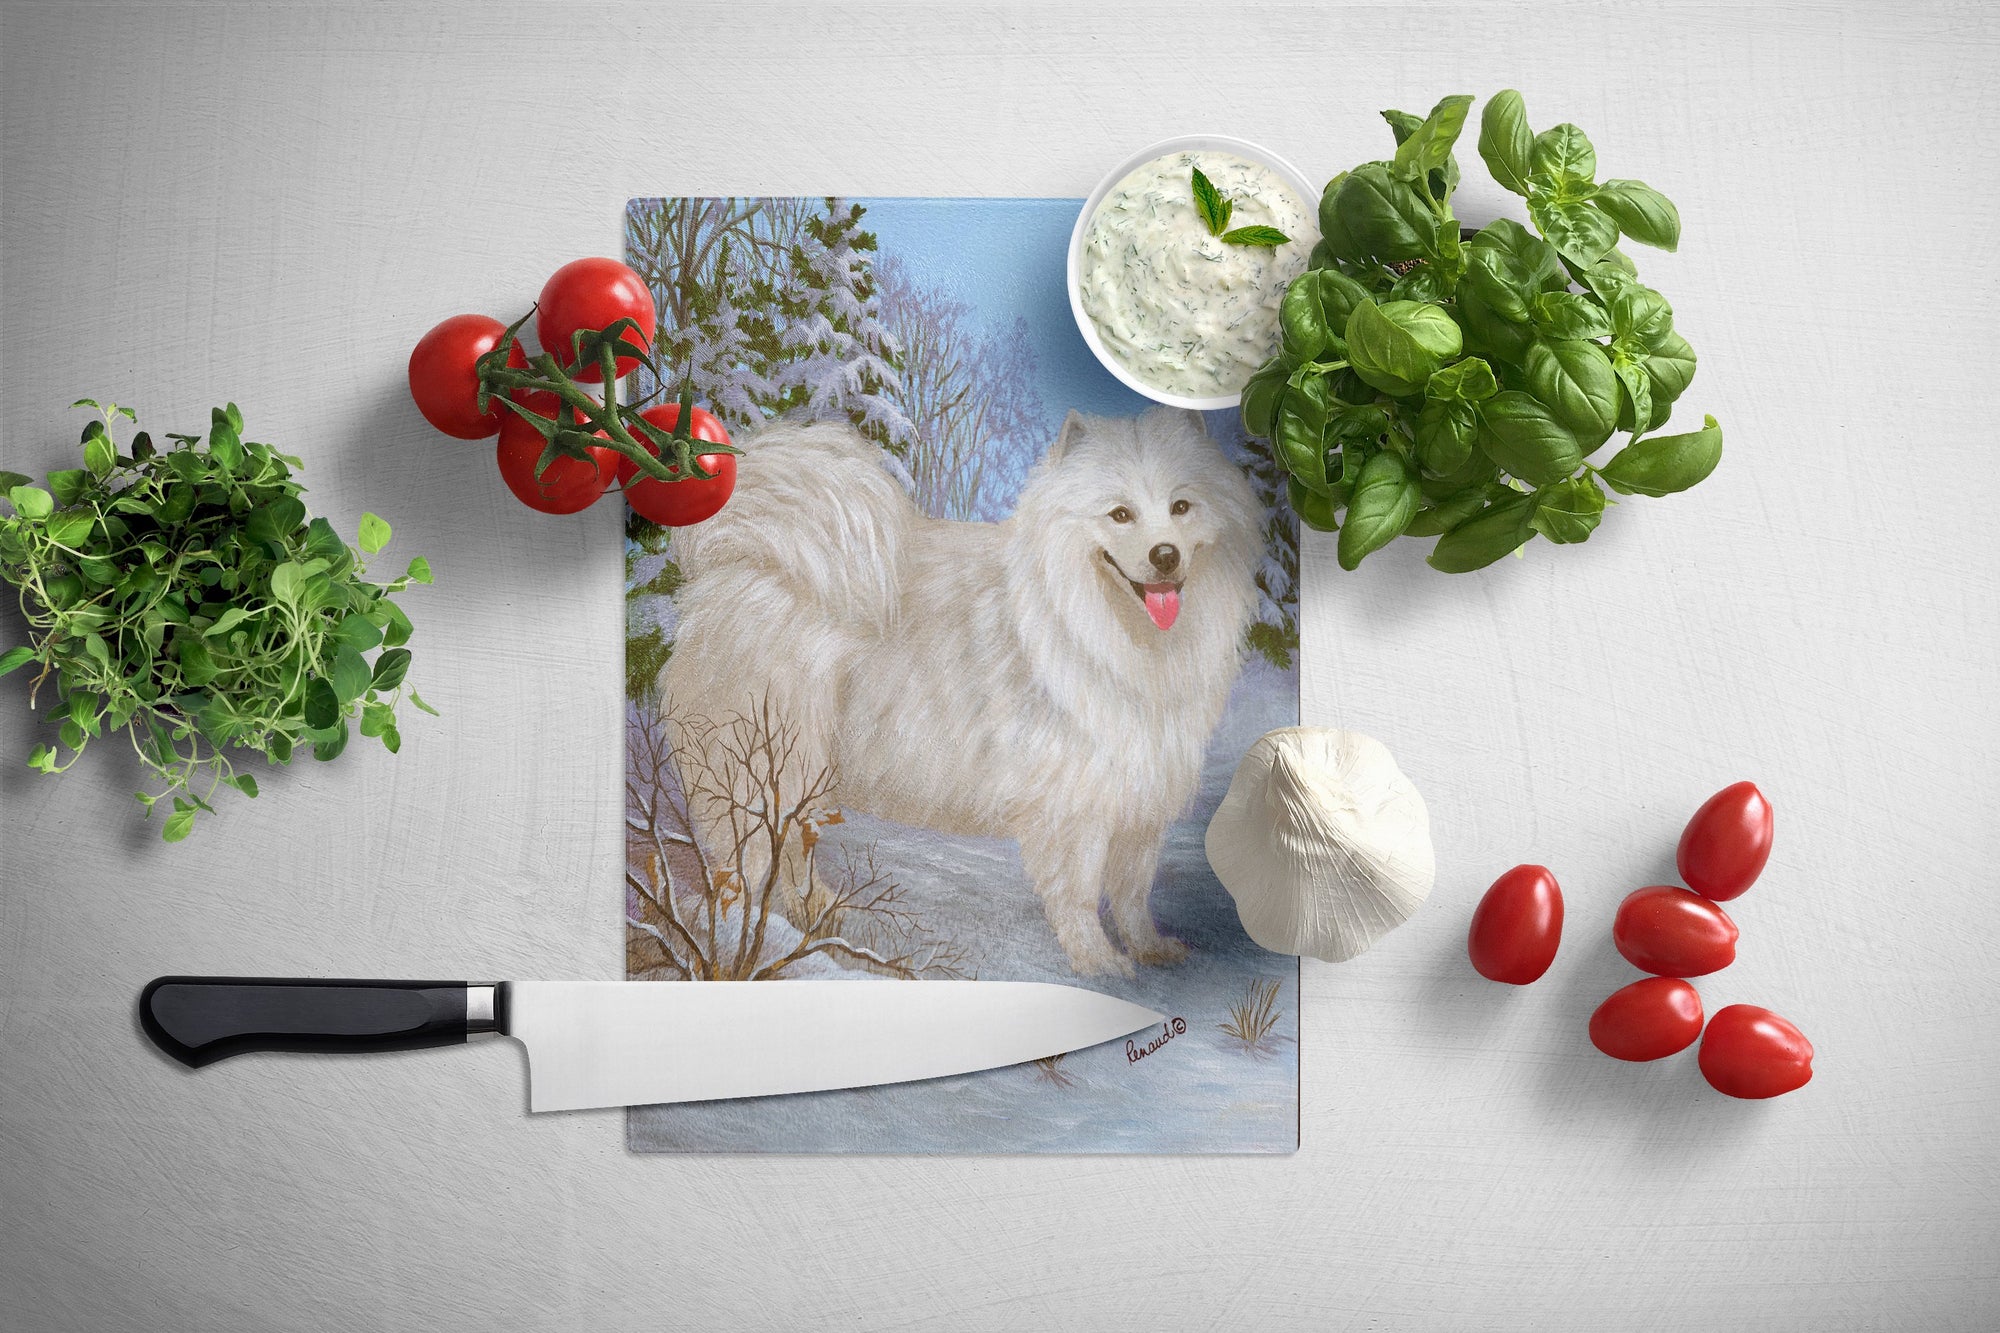 Samoyed Happiness Glass Cutting Board Large PPP3157LCB by Caroline's Treasures